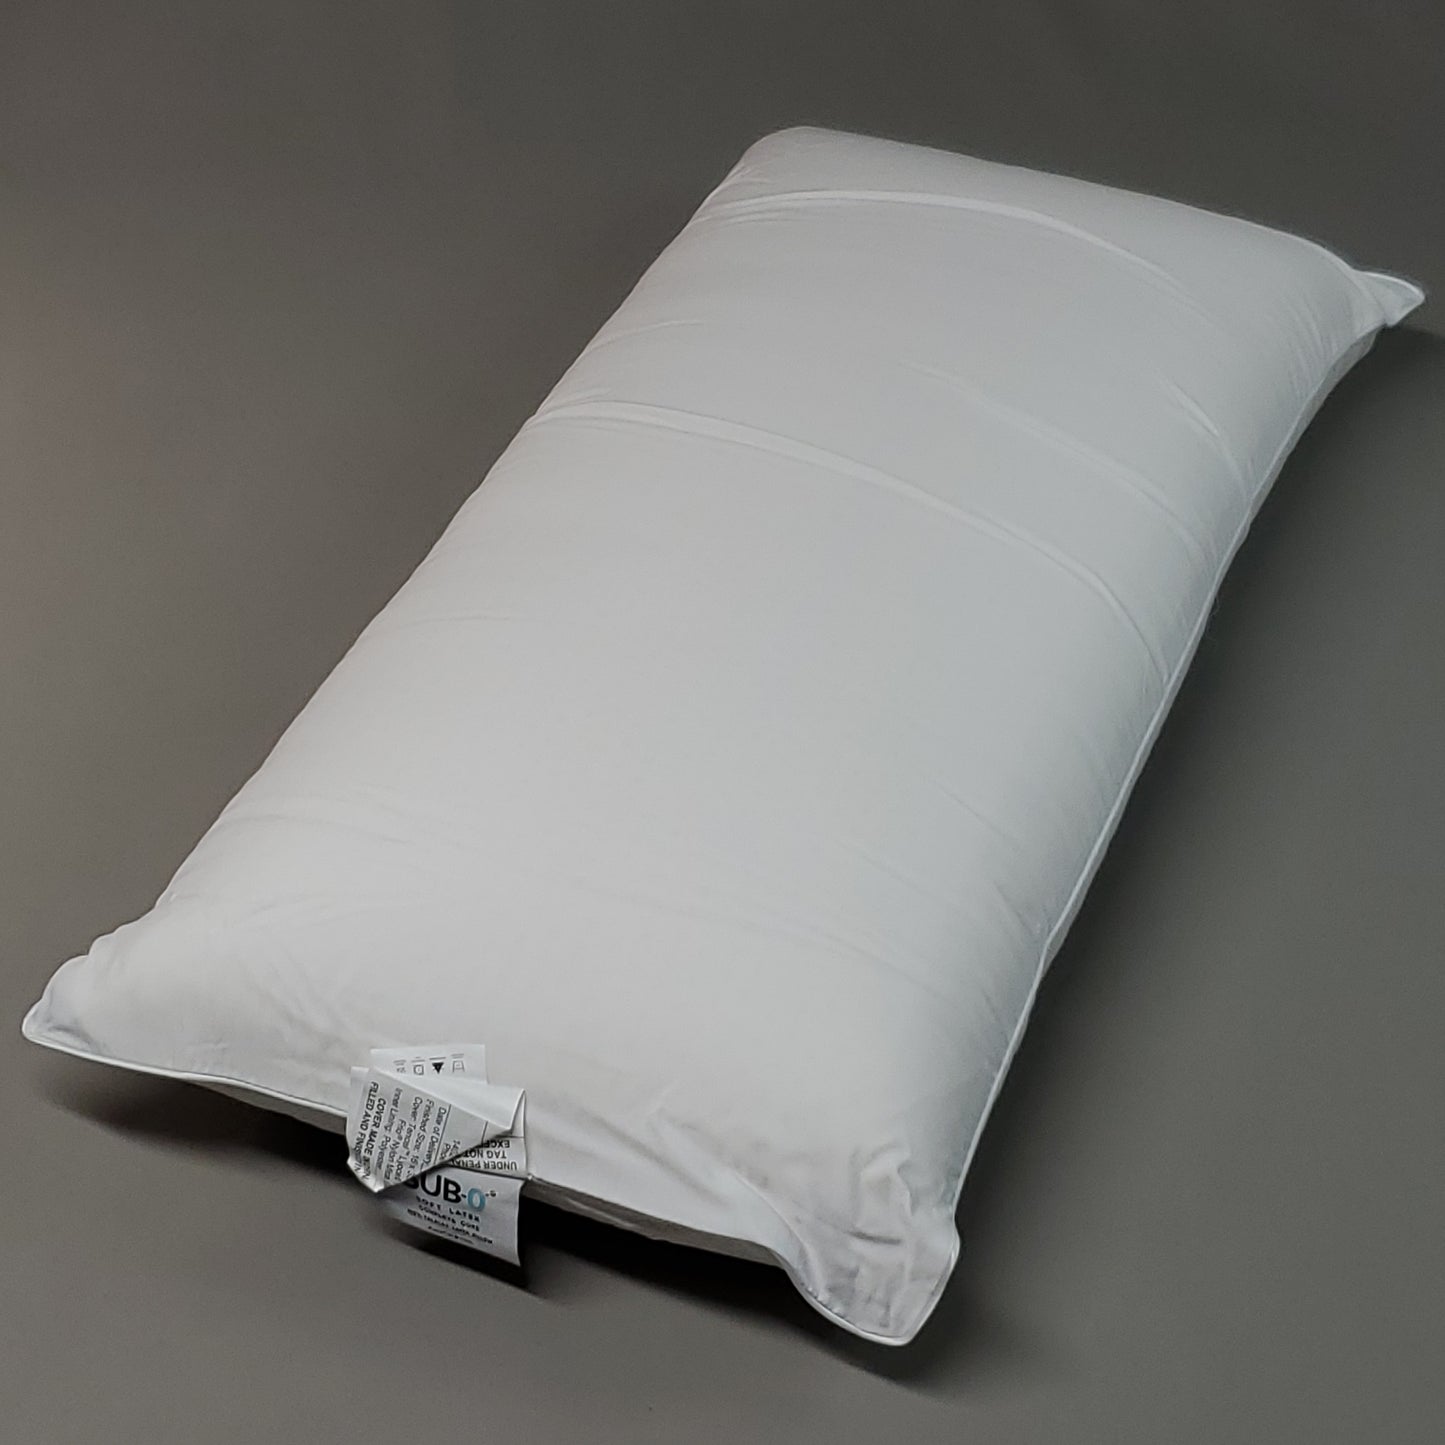 Sub-0 Soft Latex Complete Core 100% Talalay Pillow 33"x16" King PCFRIOL626 (New)